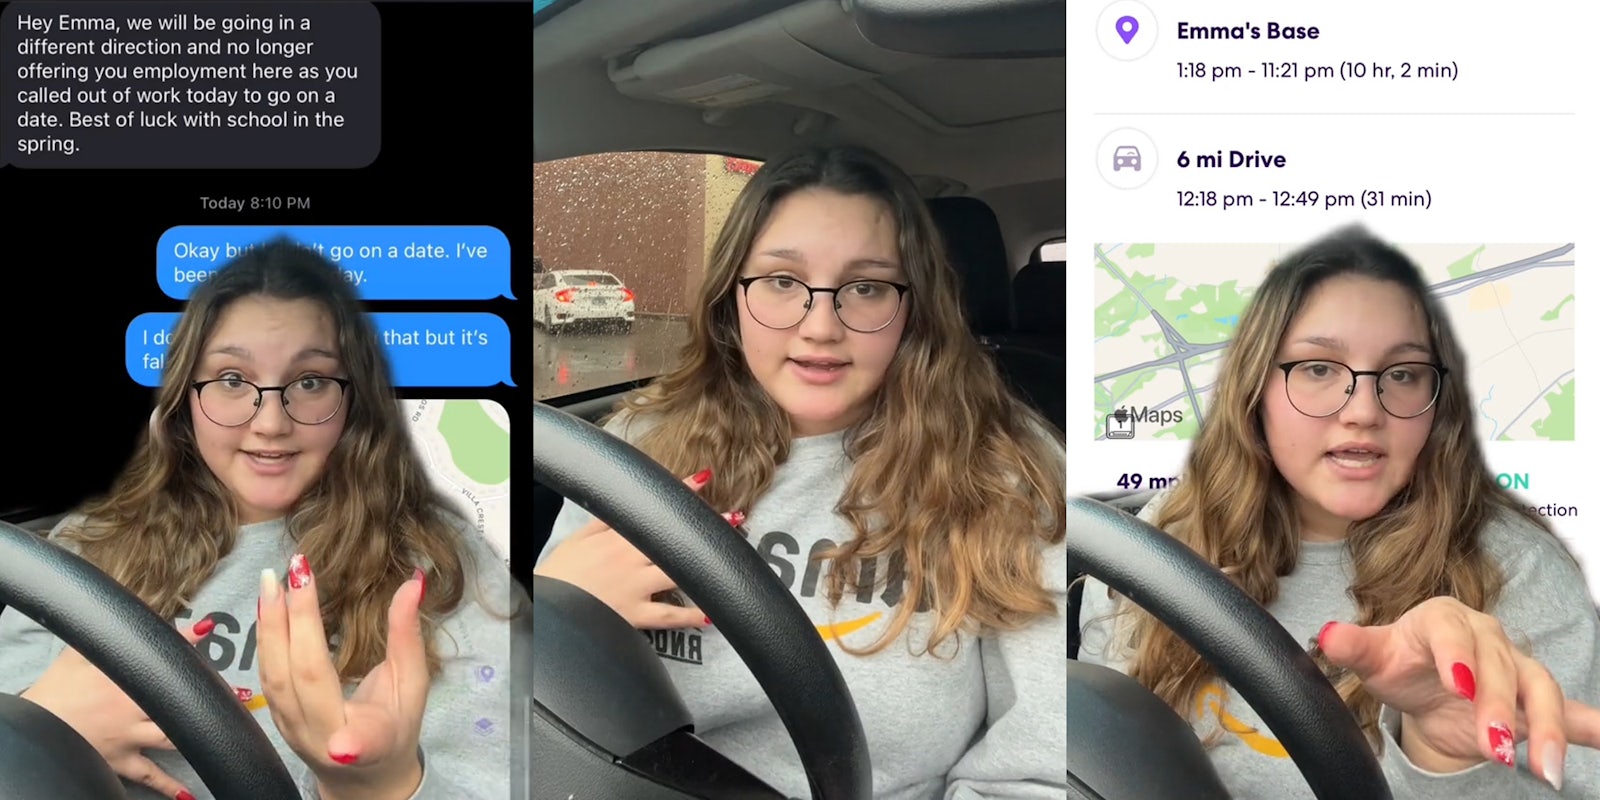 woman greenscreen TikTok over text messages 'Hey Emma, we will be going in a different direction and no longer offering you employment here as you called out of work today to go on a date. Best of luck with school in the spring.' (l) woman speaking in car (c) woman greenscreen over live 360 Emma's Base (r)